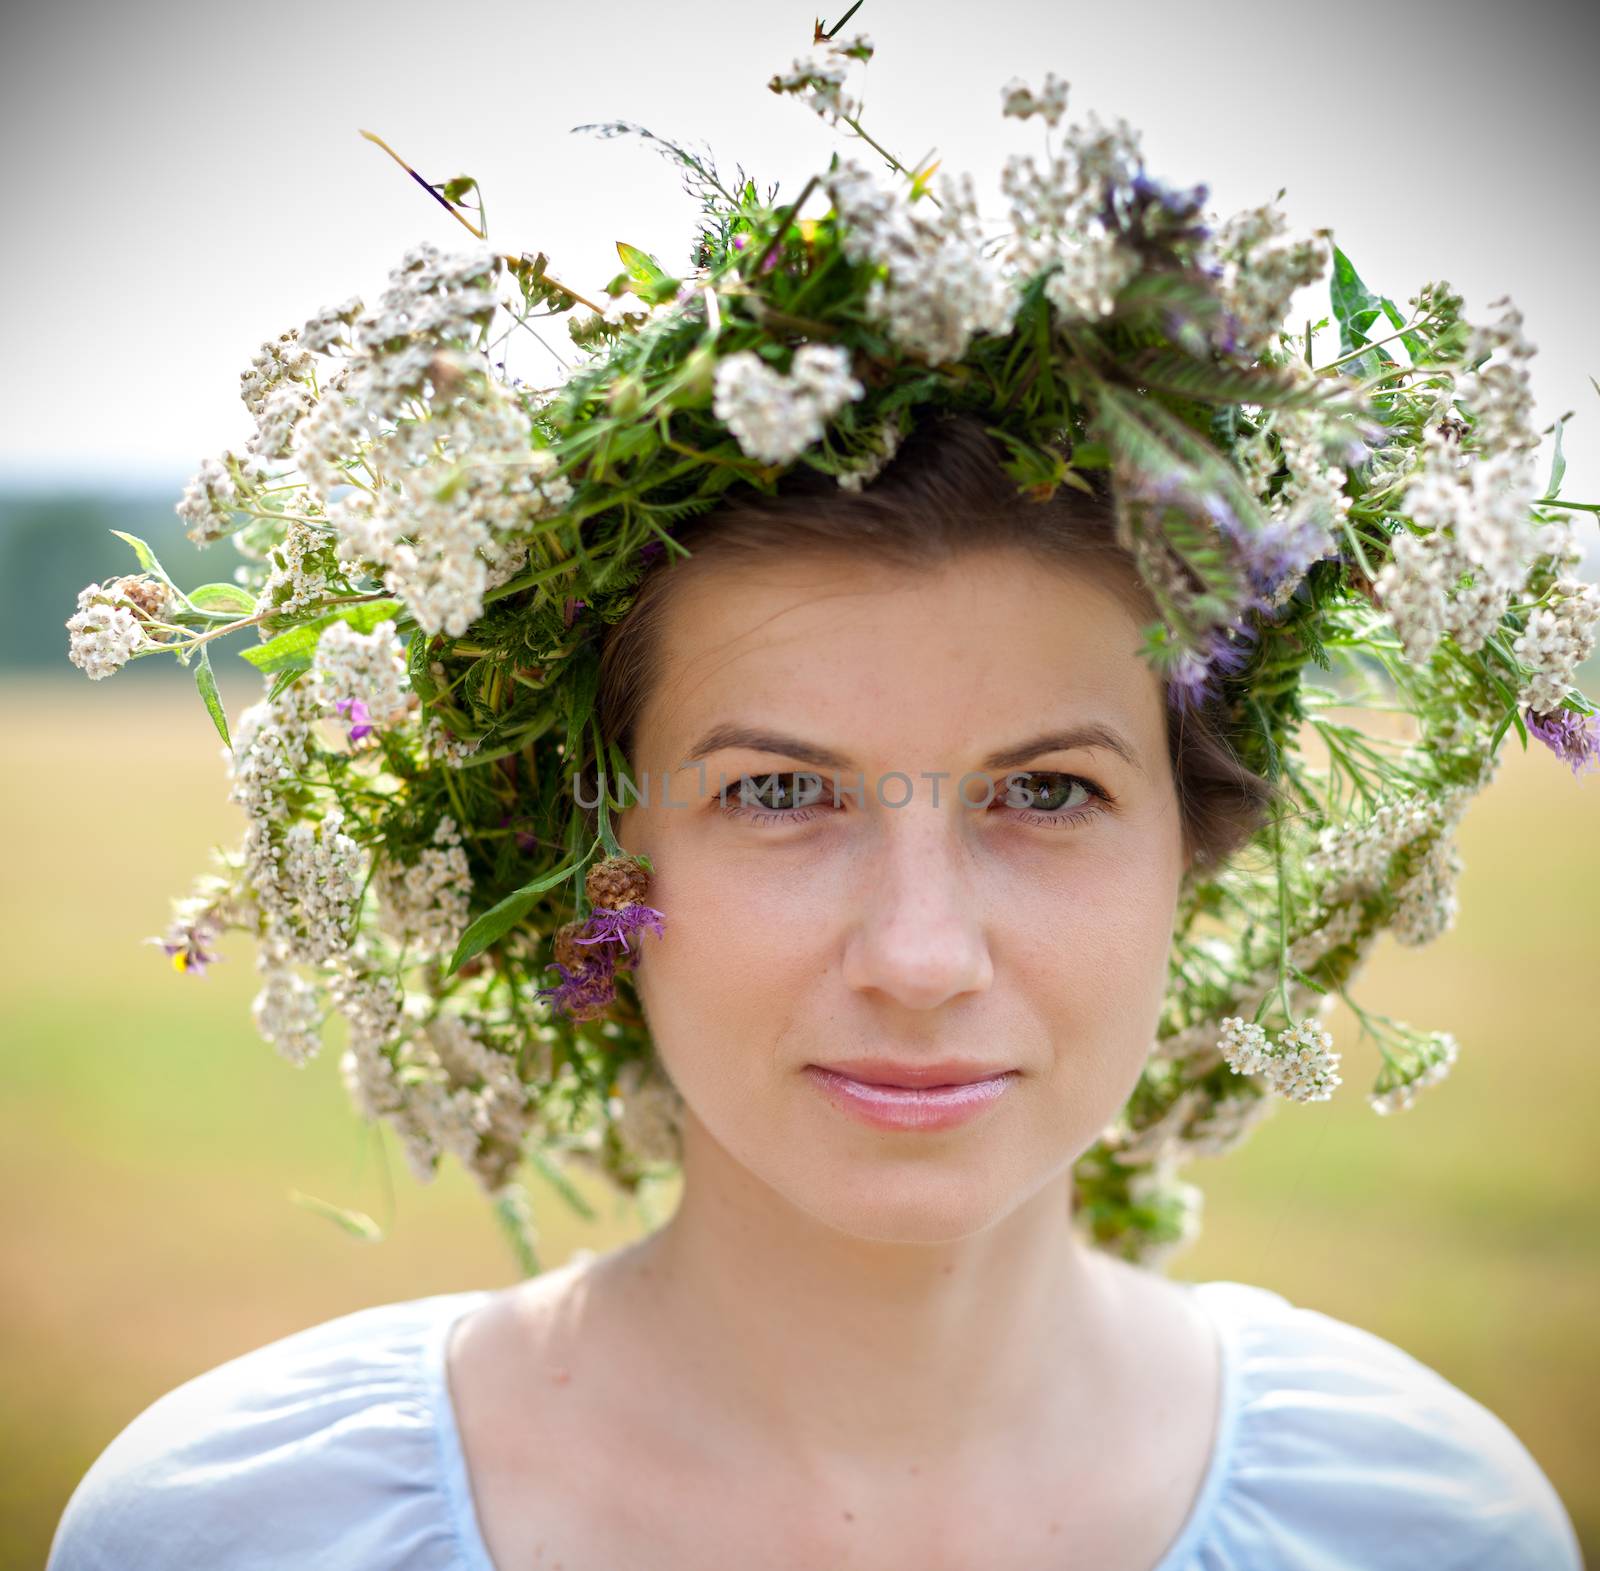 portrait of a young woman wearing a crown of summer wildflowers